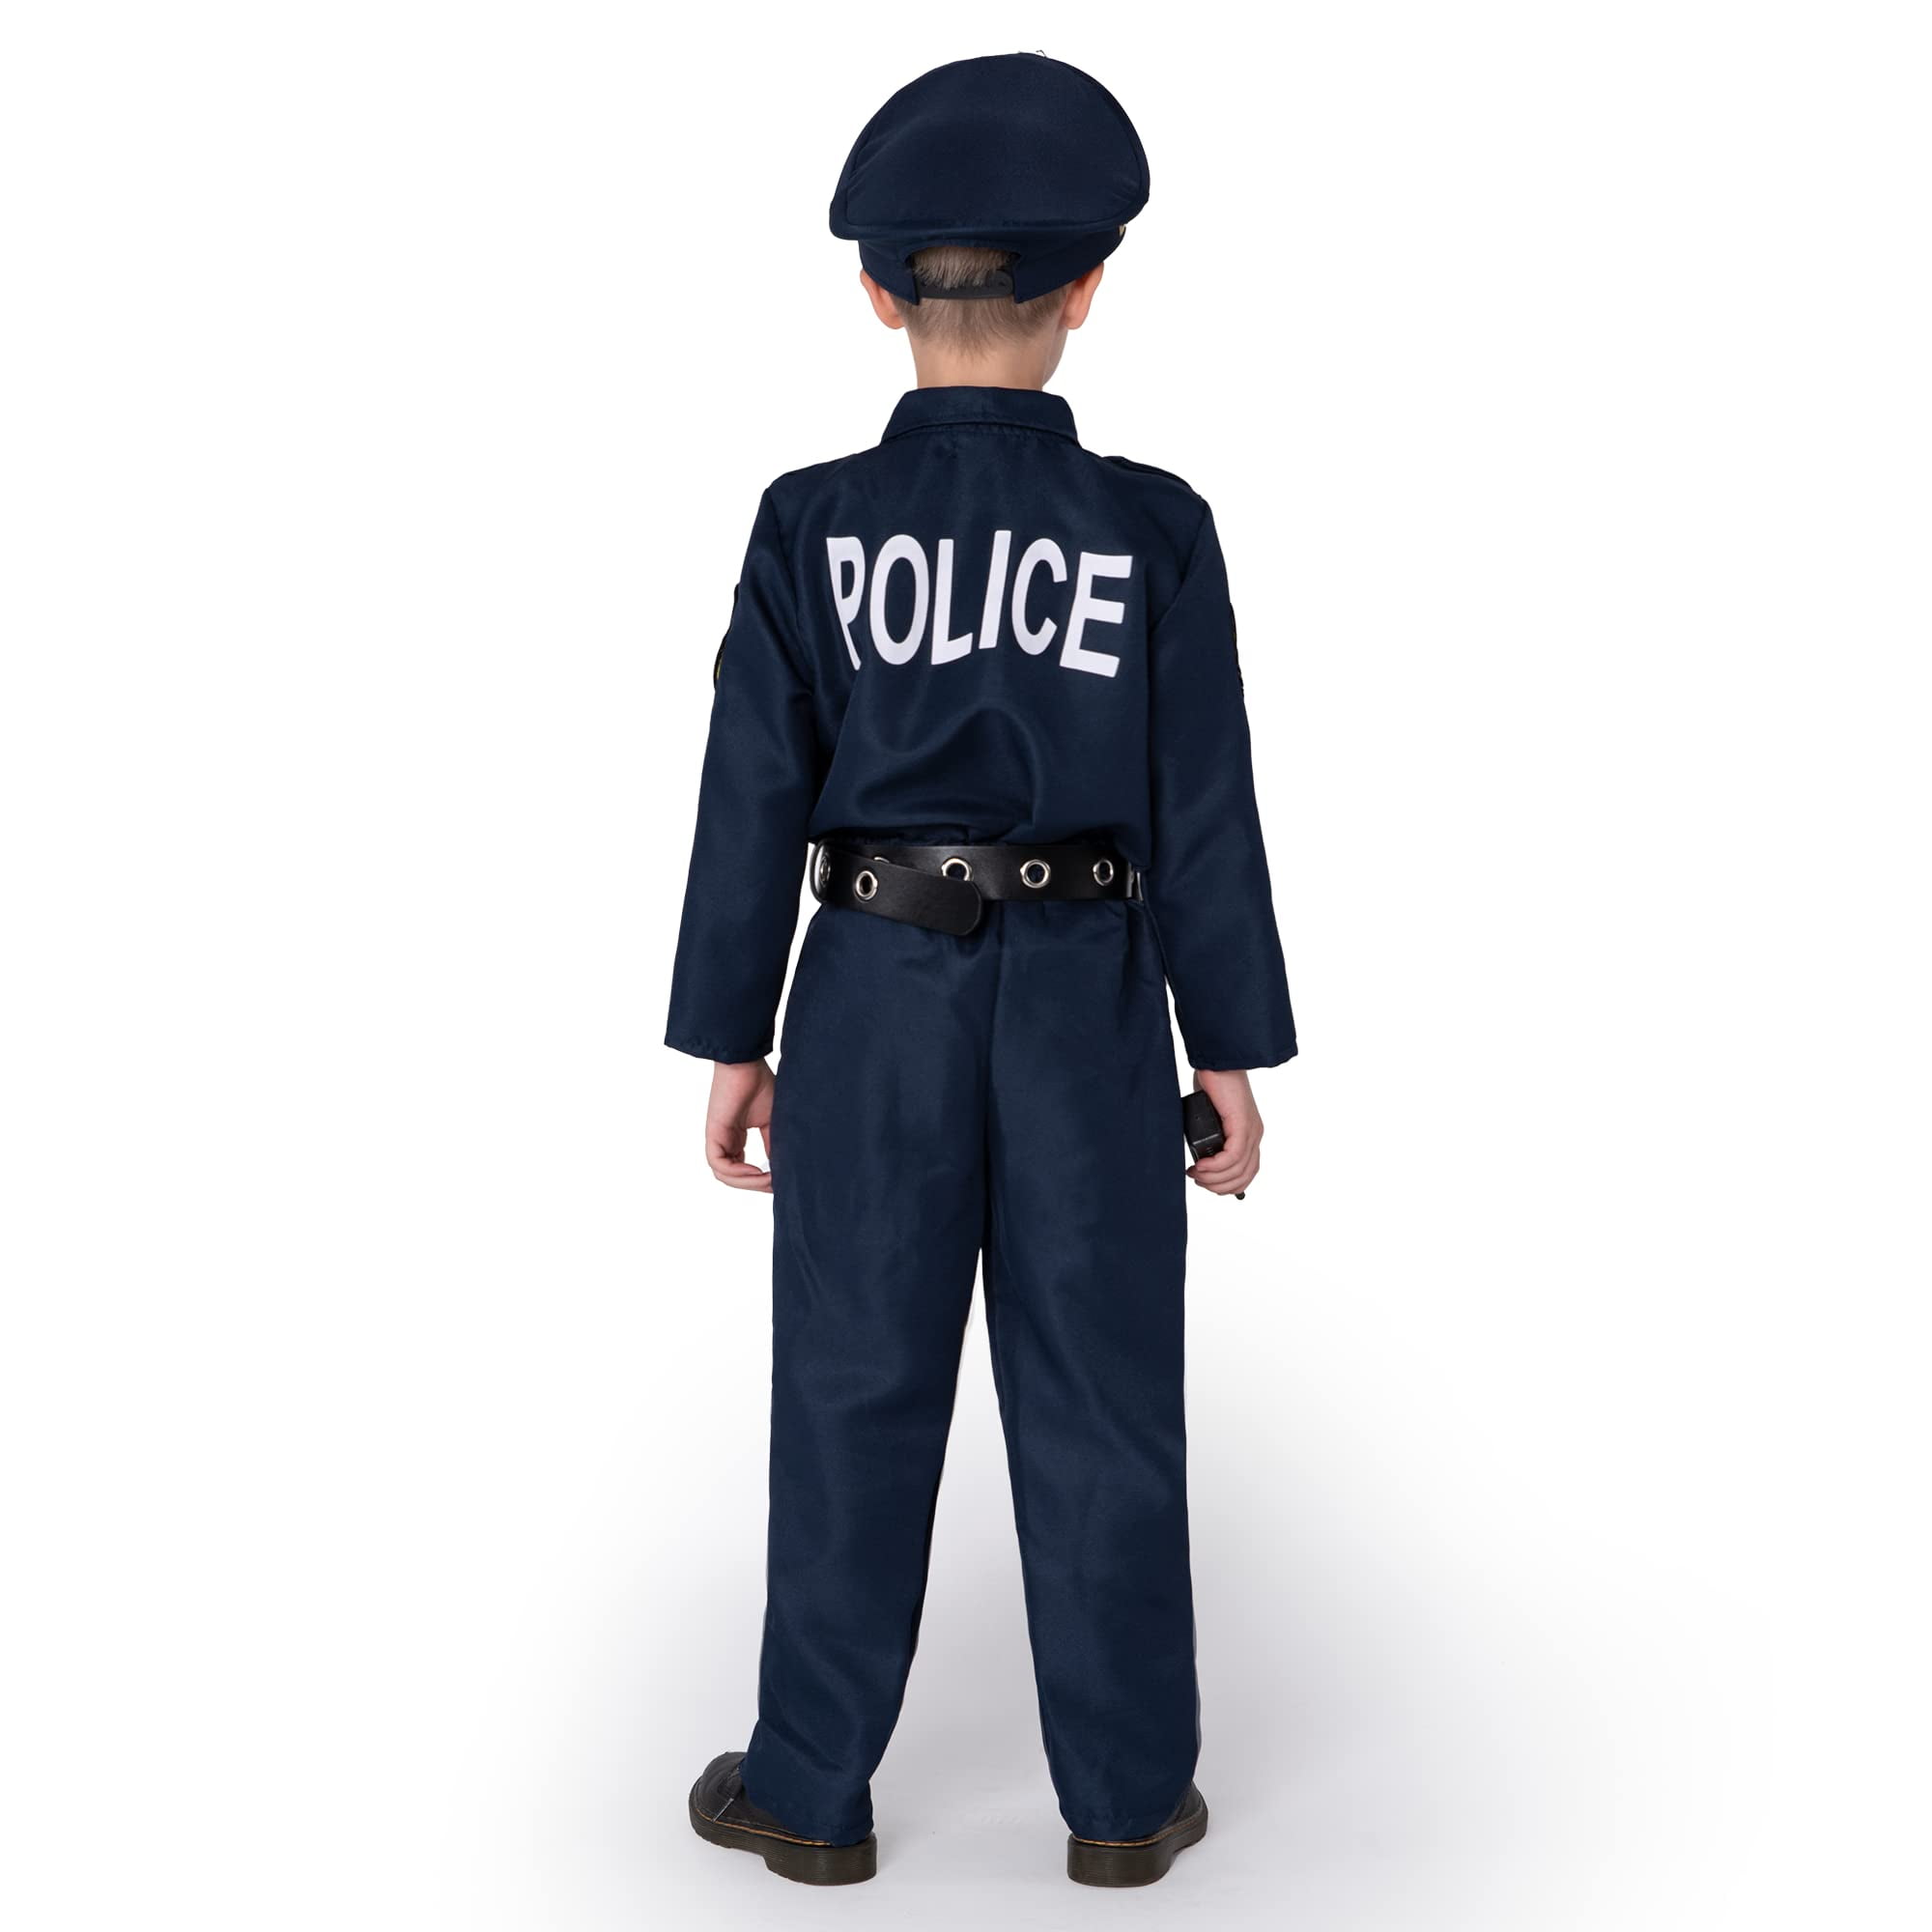 Cocojeci Boys Dress up Trunk Costumes Set,15pcs Pretend Role Play Set  Fireman, Police, Construction Worker Costume with Accessories for Kids Ages  3-7